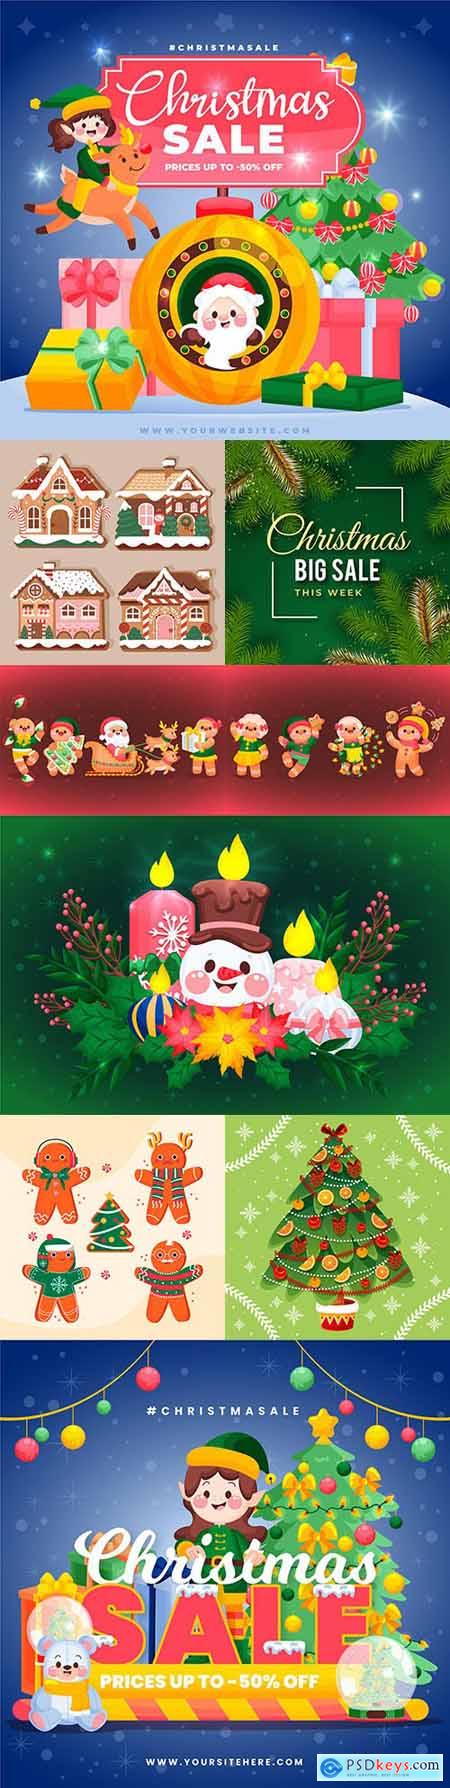 Christmas sales and New Year design elements illustration